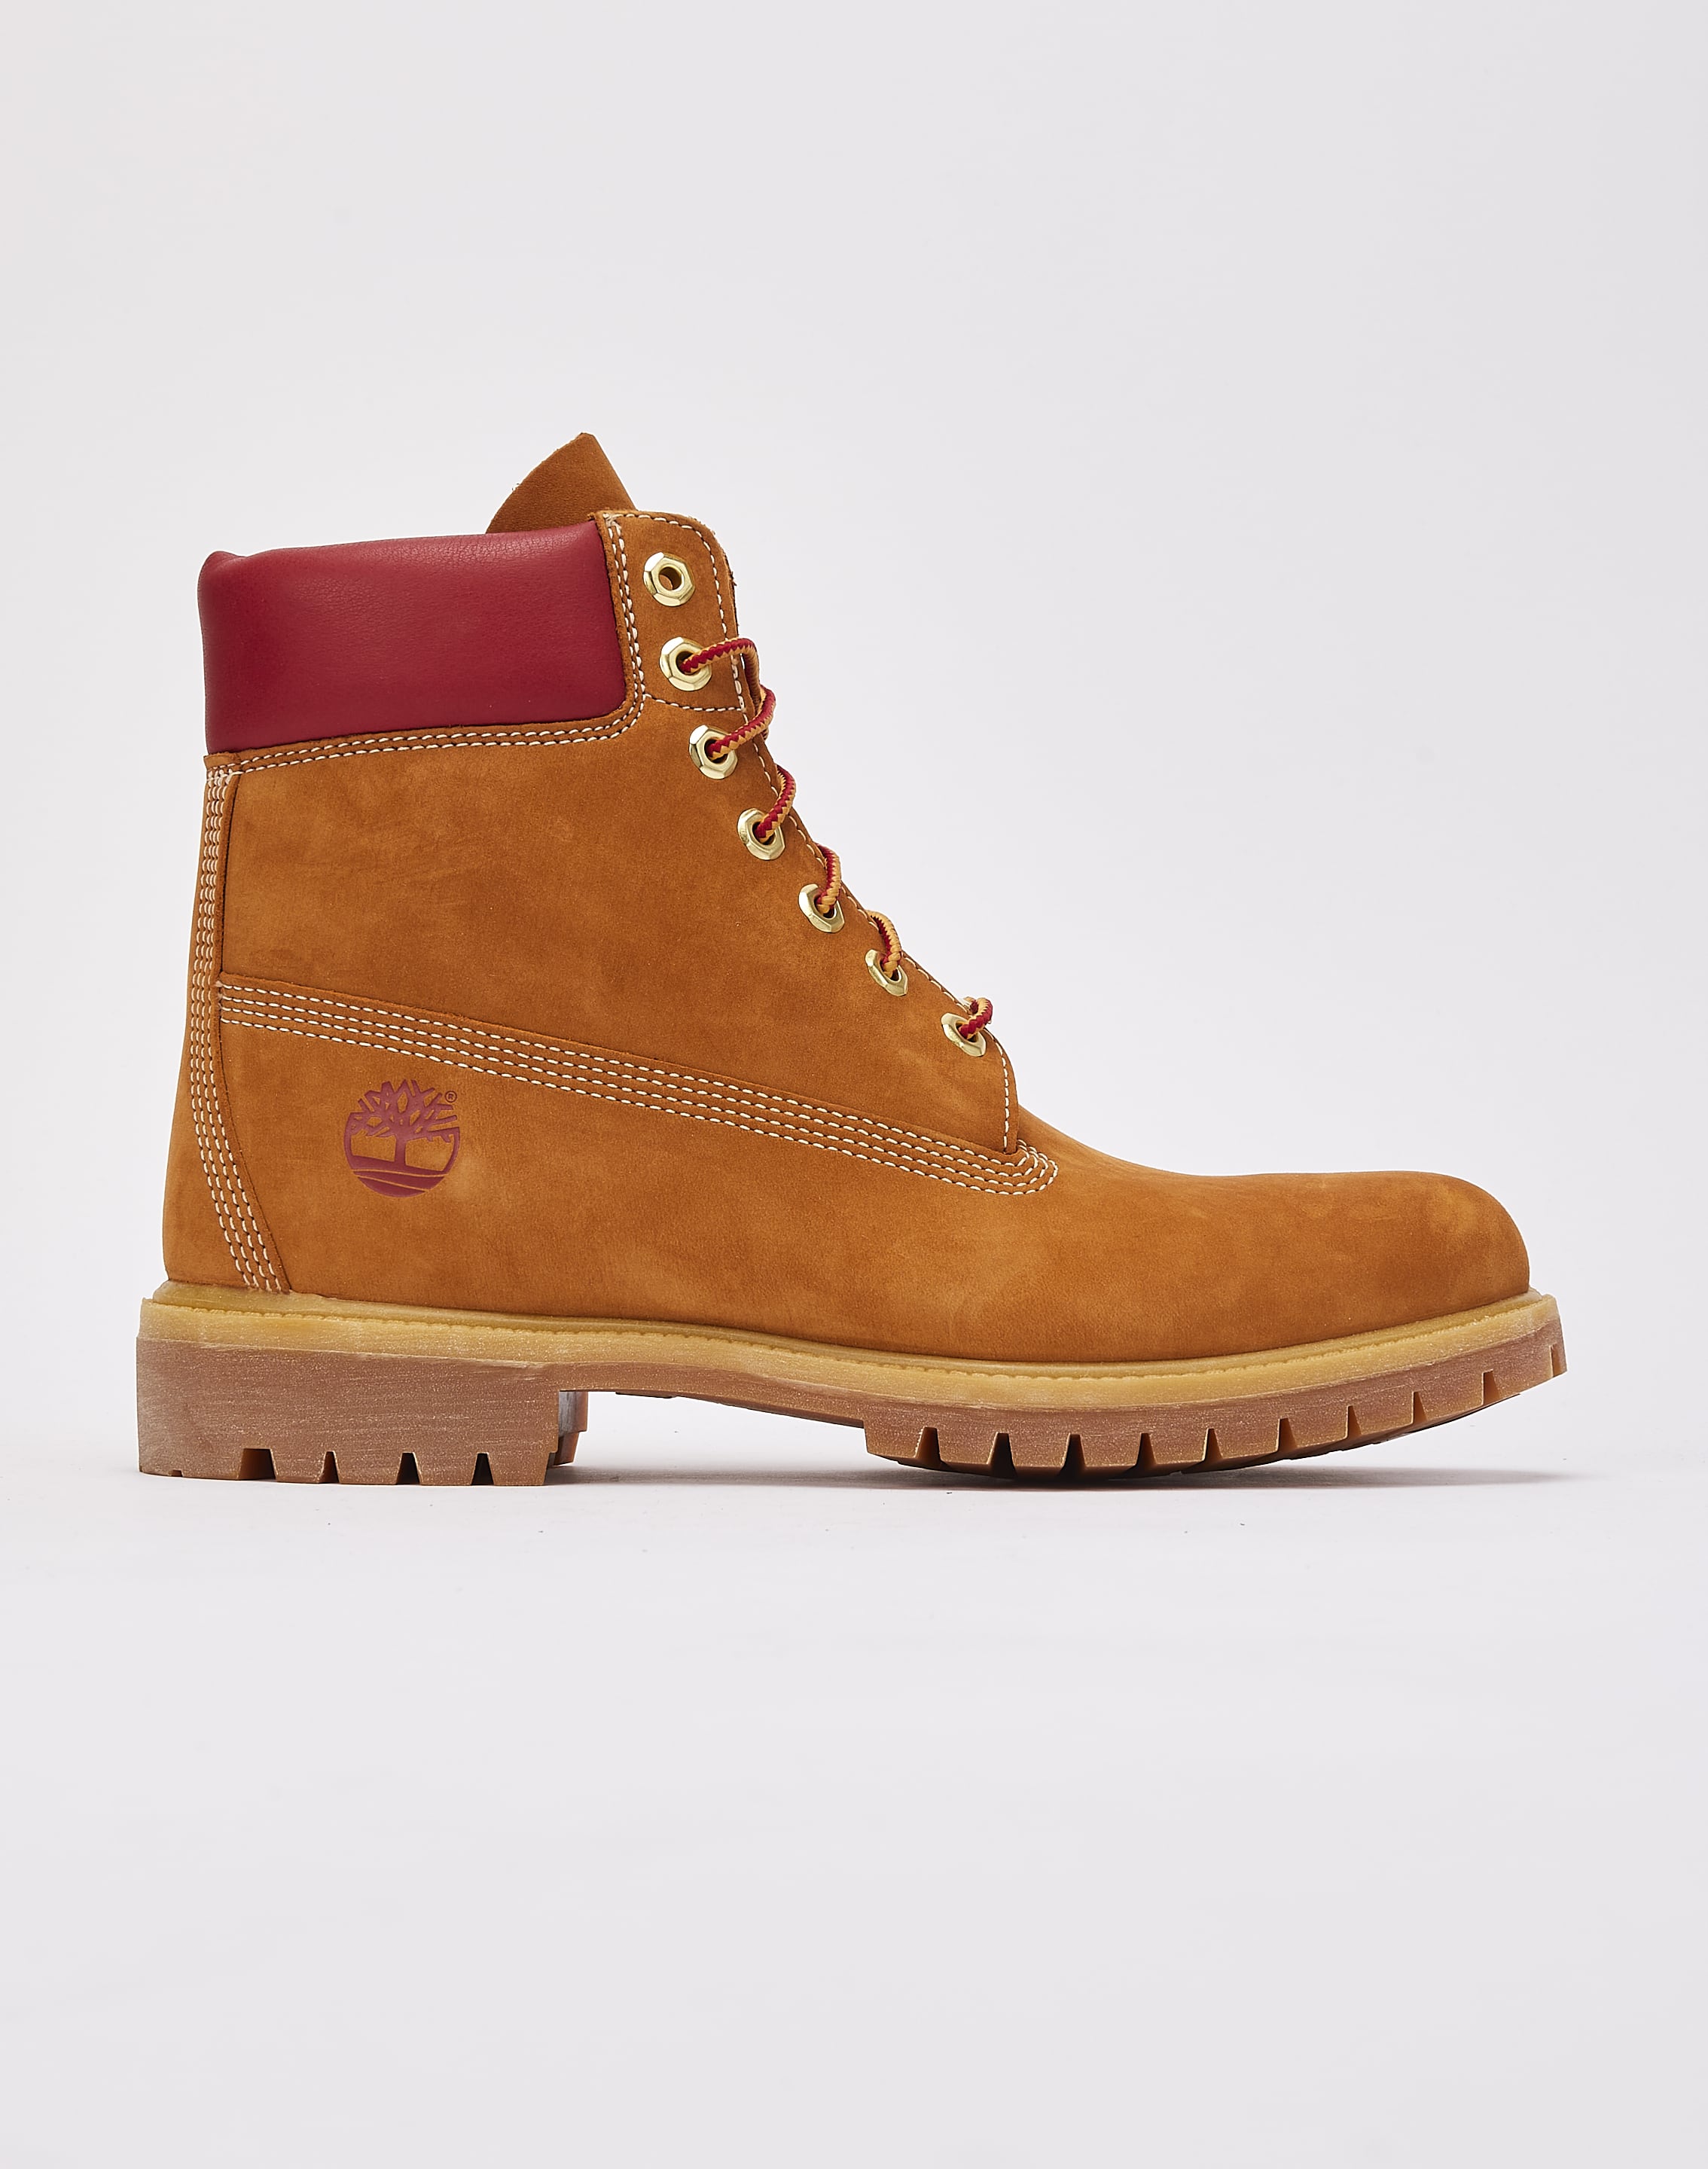 6-Inch Premium Boots 'Red Tops' DTLR